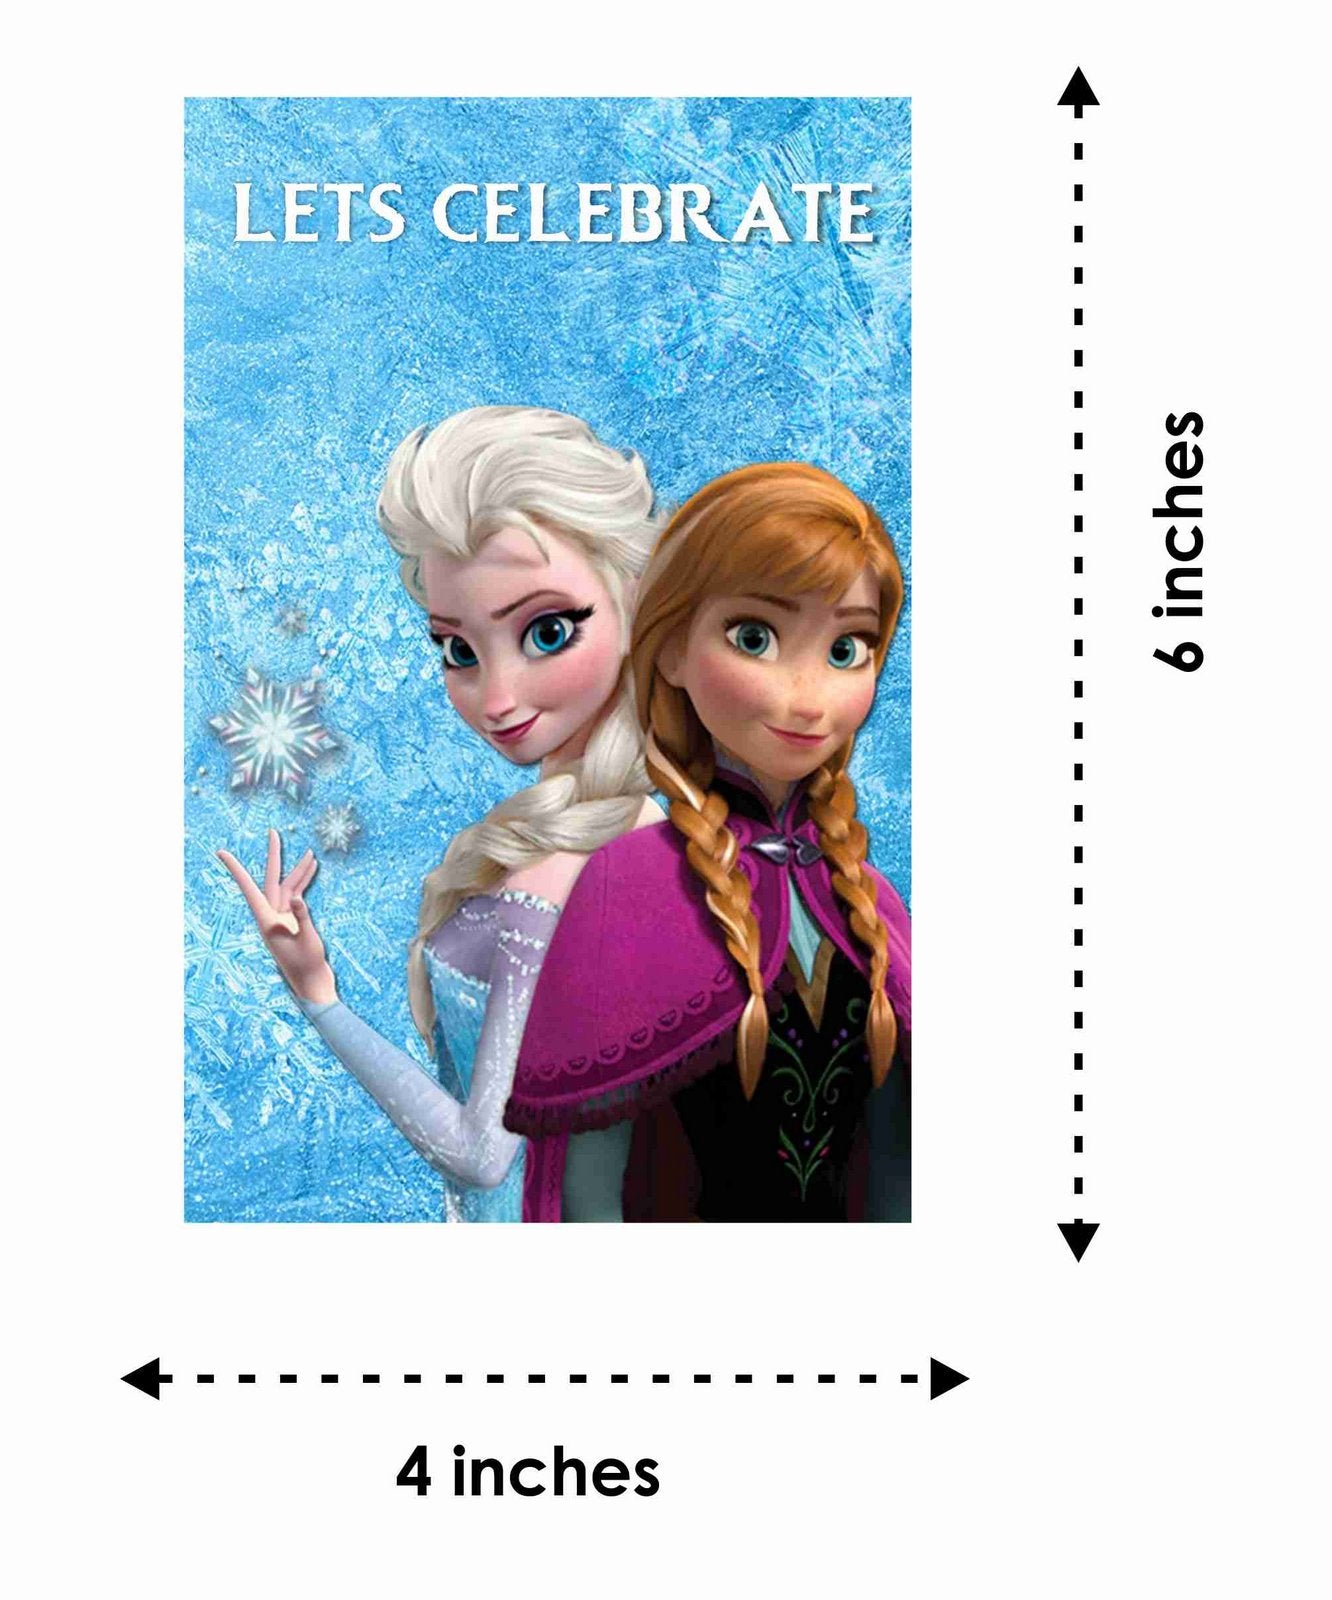 Frozen Theme Children's Birthday Party Invitations Cards with Envelopes - Kids Birthday Party Invitations for Boys or Girls,- Invitation Cards (Pack of 10)